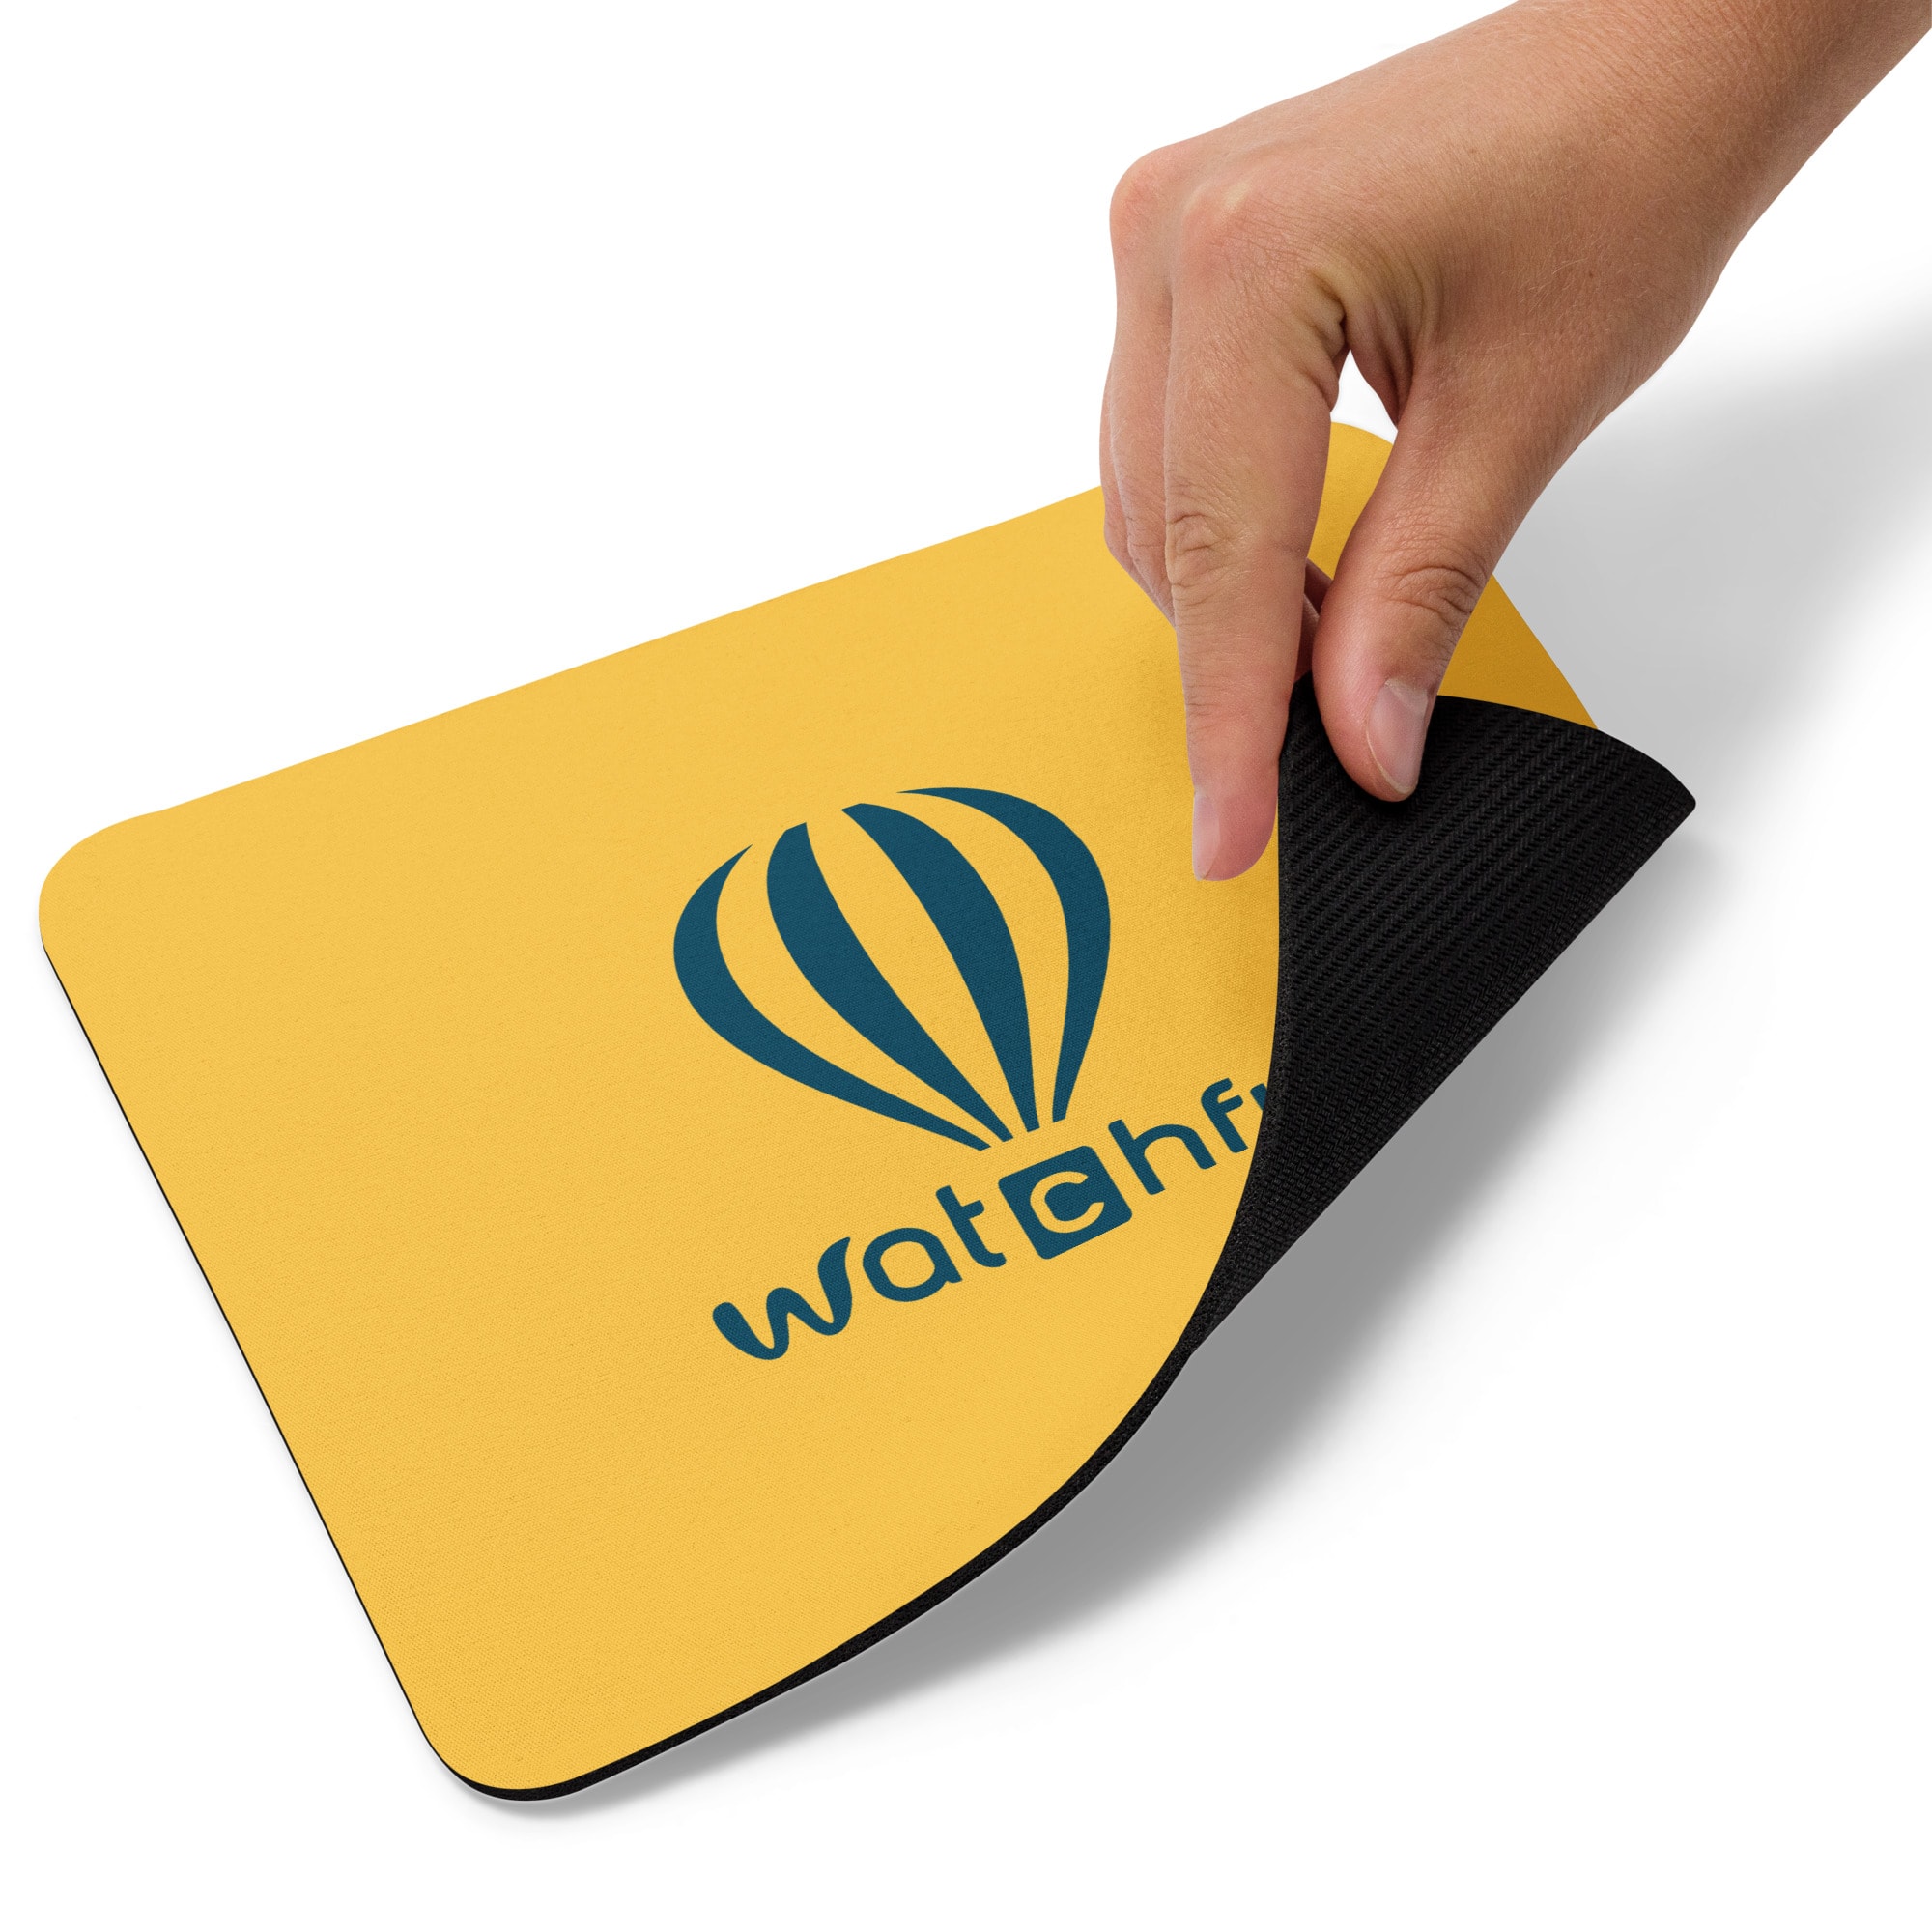 Mouse Pad White Product Details 633d83604a531.jpg